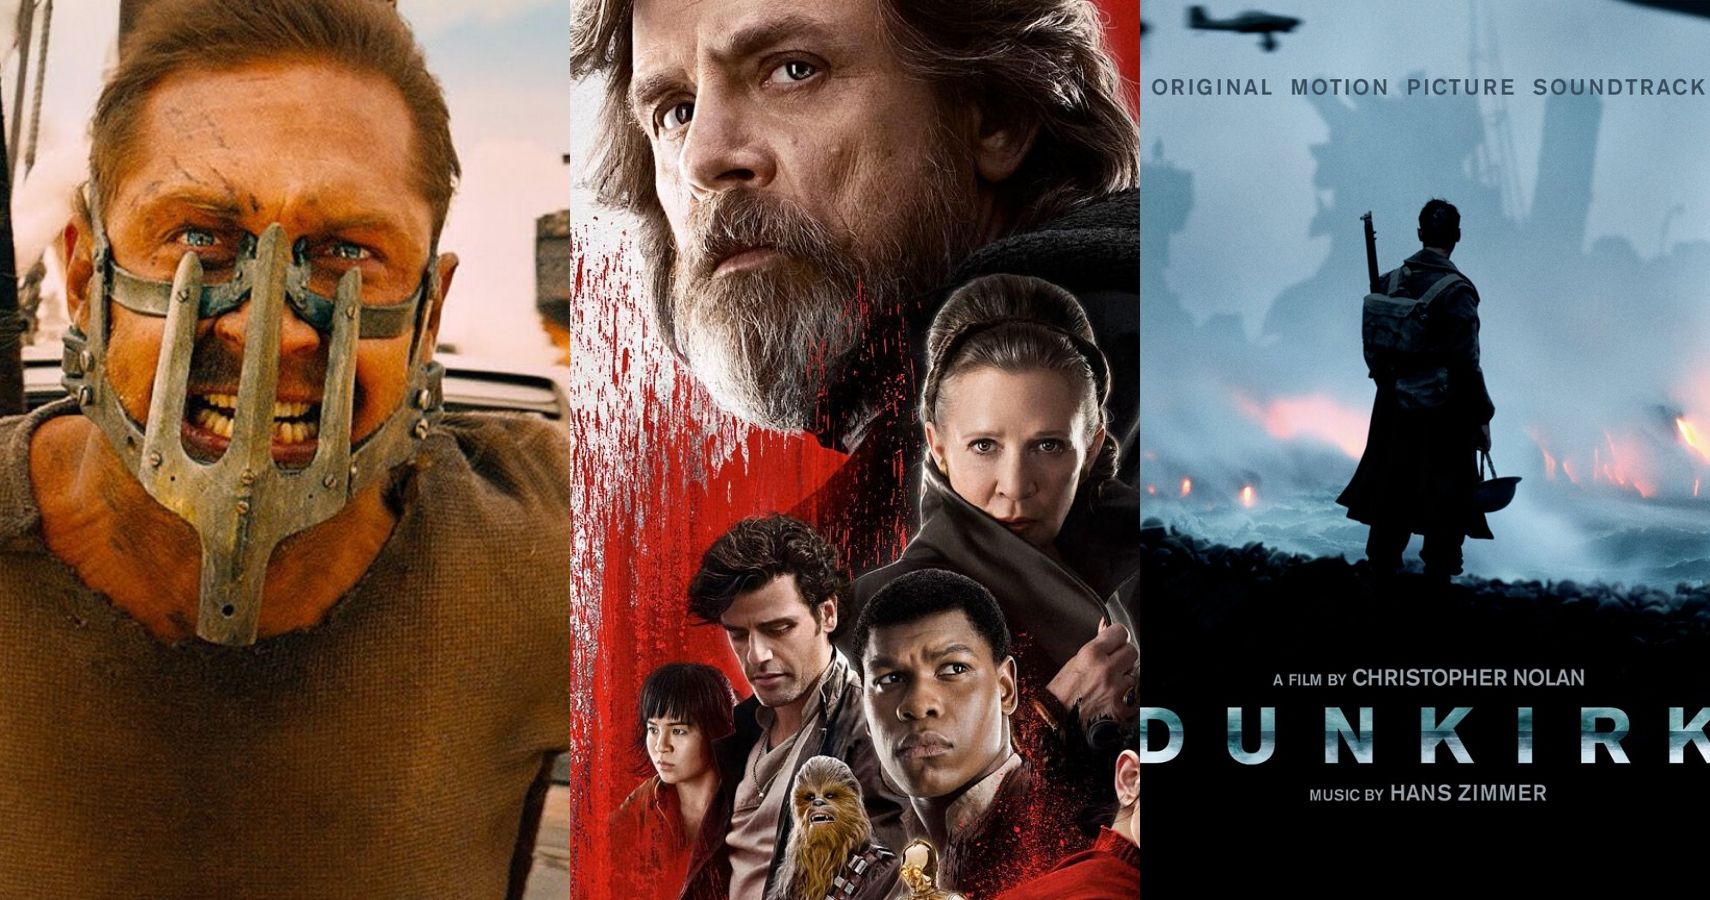 The 10 Best Action & Adventure Movies Of The Decade (According To